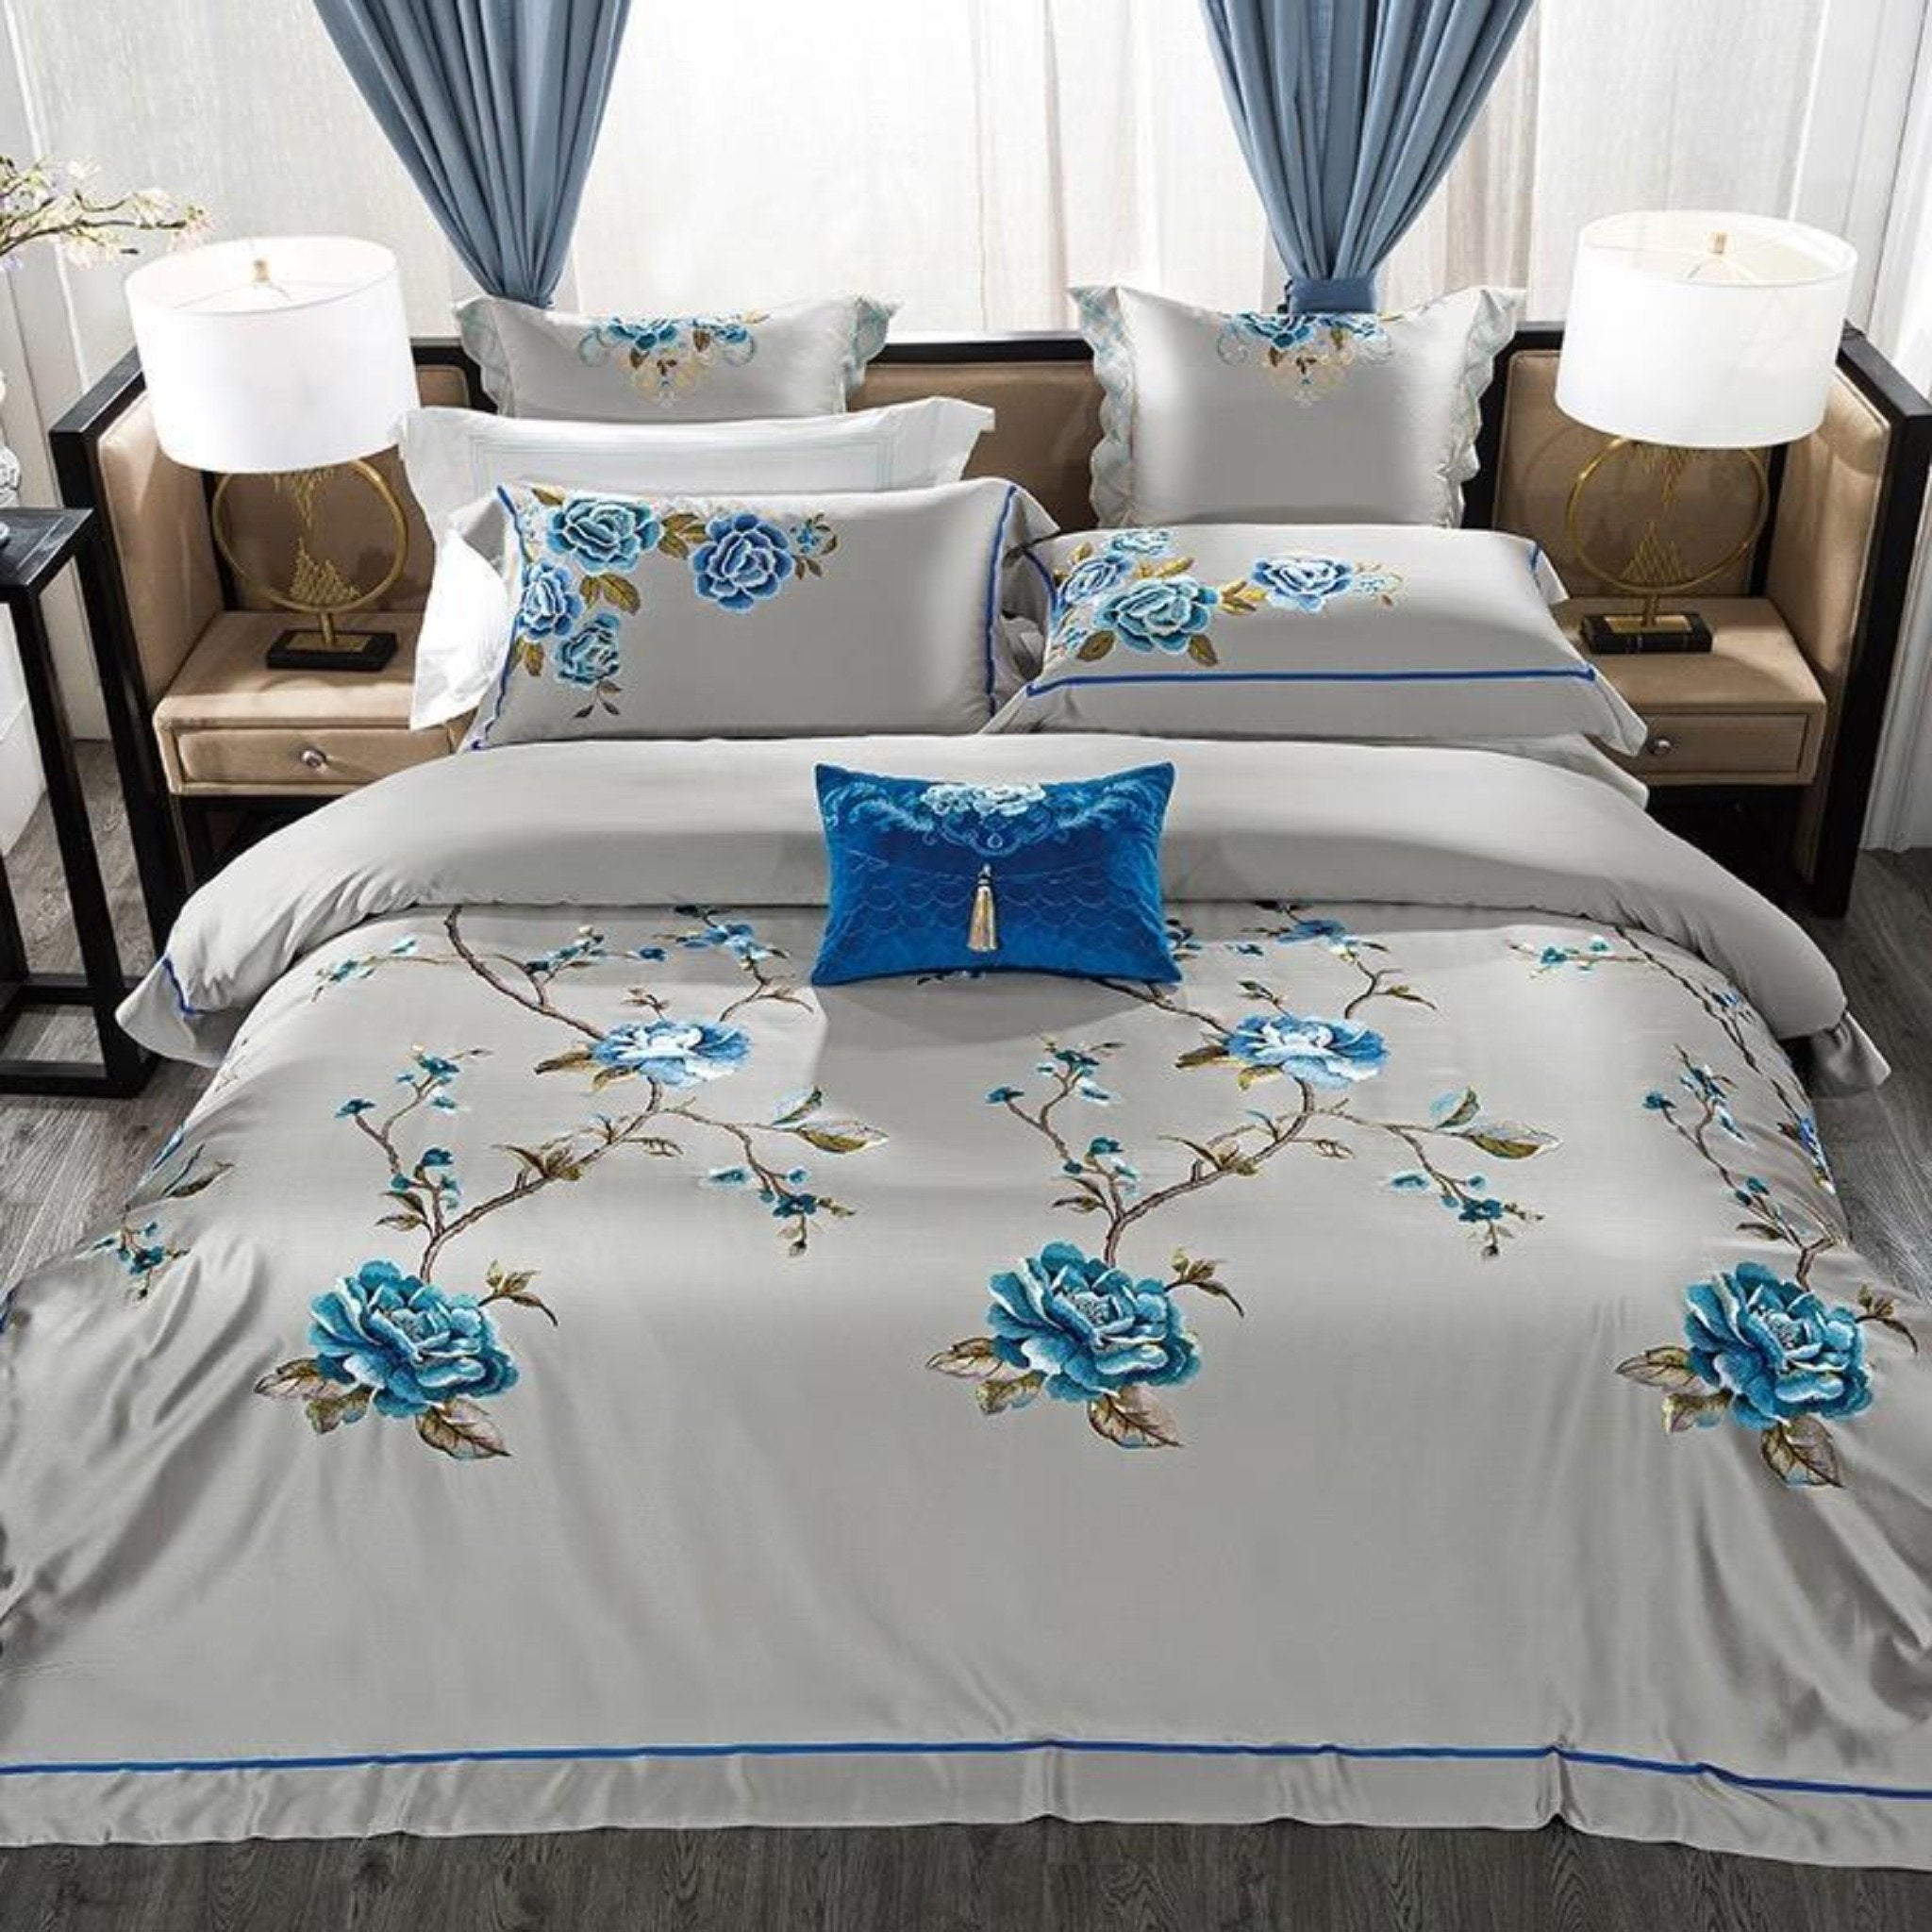 Lowest prices bedding sets queen & king here! next day delivery on luxury bedding sets. Never overspend on exquisite bedding sets again. Shop now.